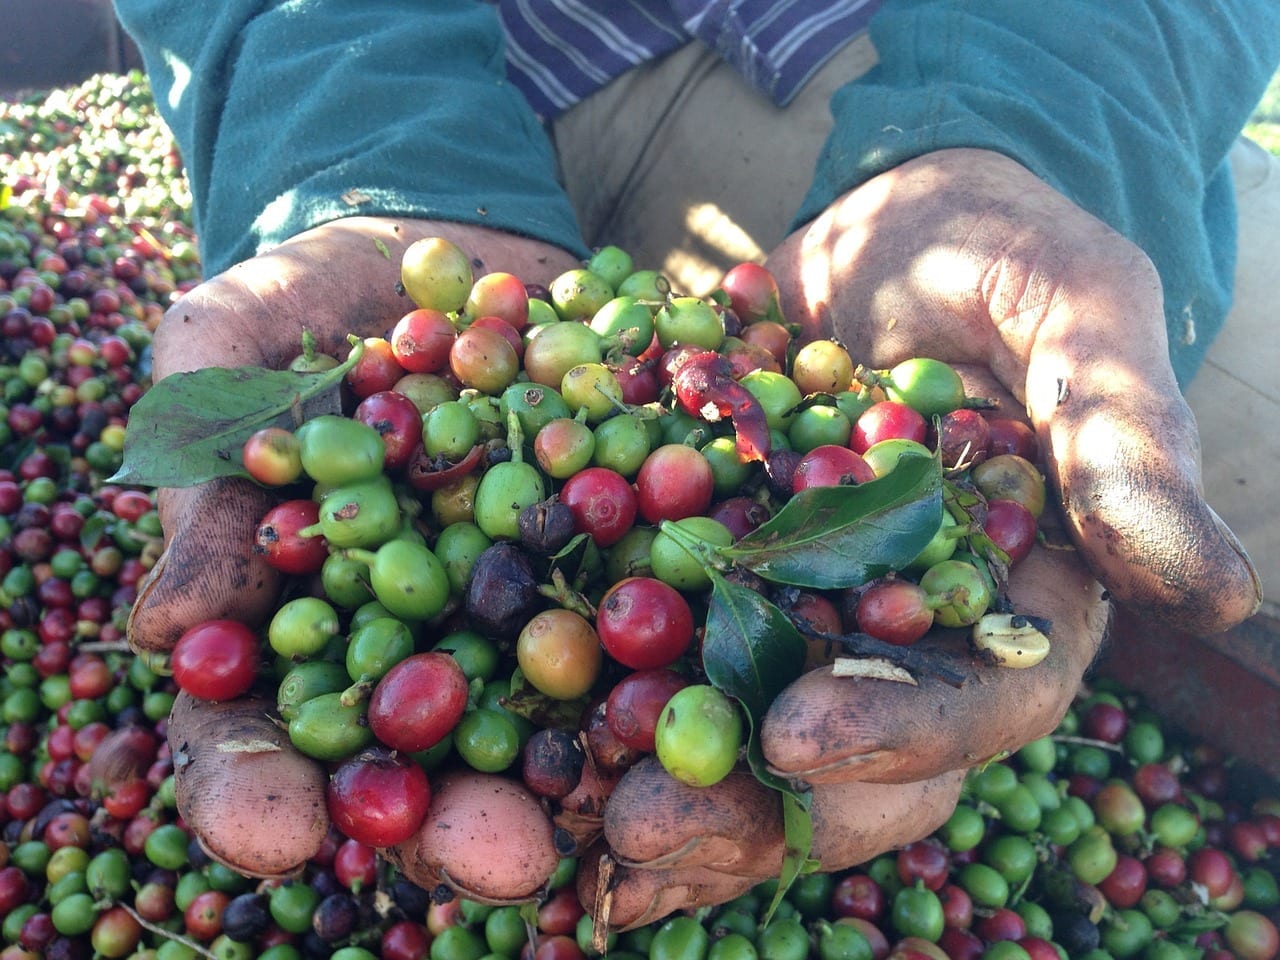 COVID-19 in the Coffee Sector: Challenges for Workers and Farmers